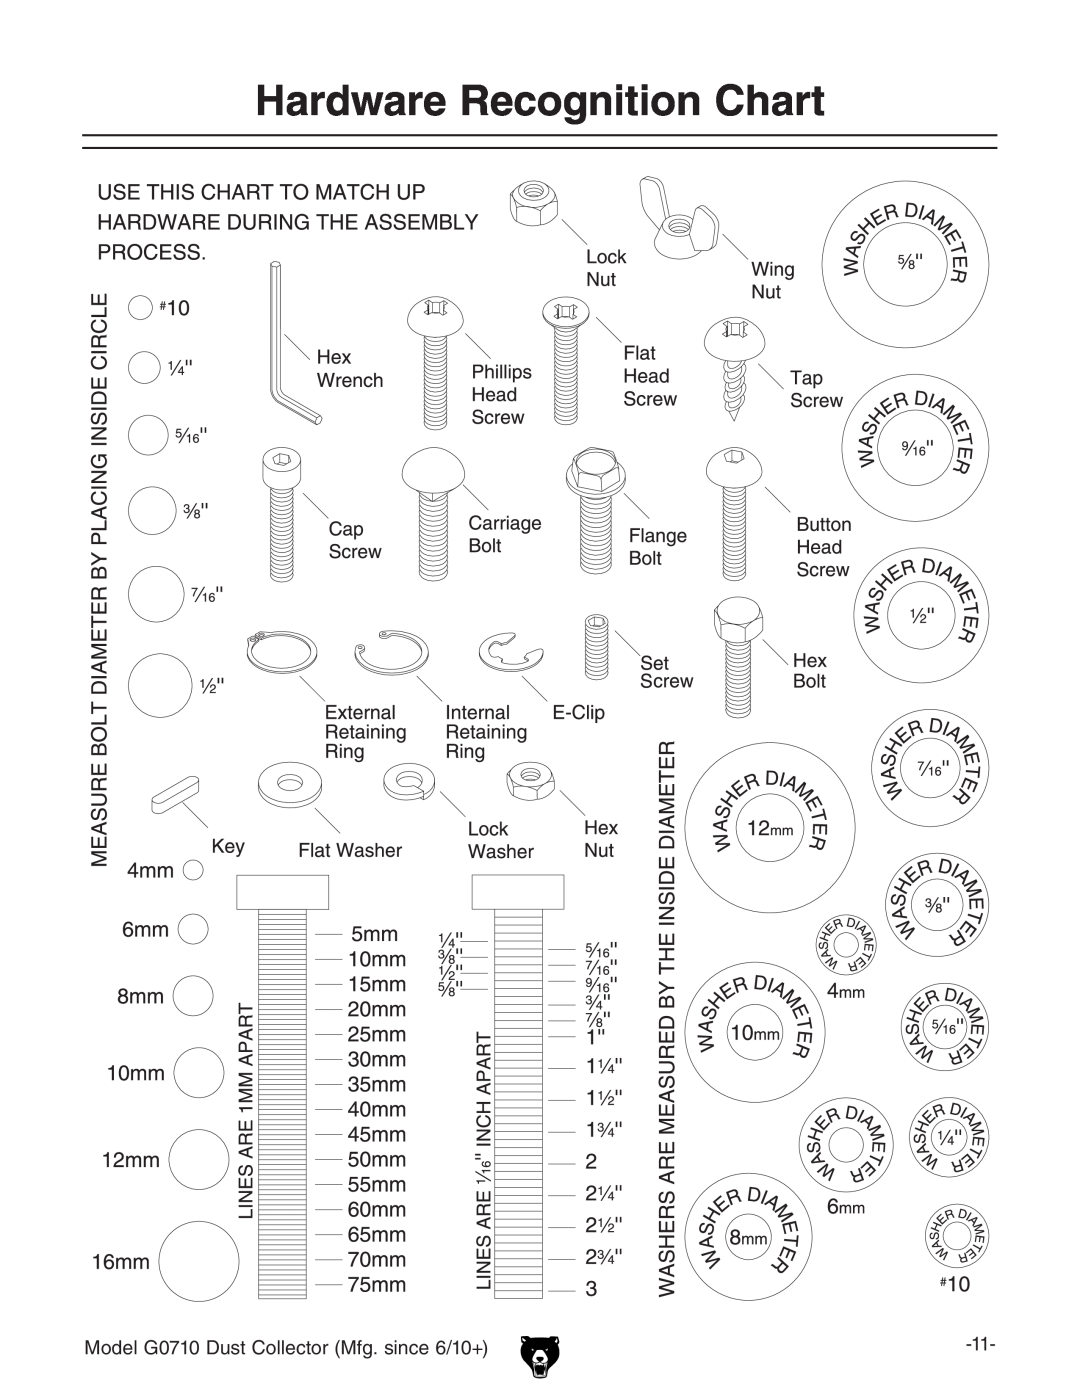 Grizzly owner manual Hardware Recognition Chart, Model G0710 Dust Collector Mfg. since 6/10+ 